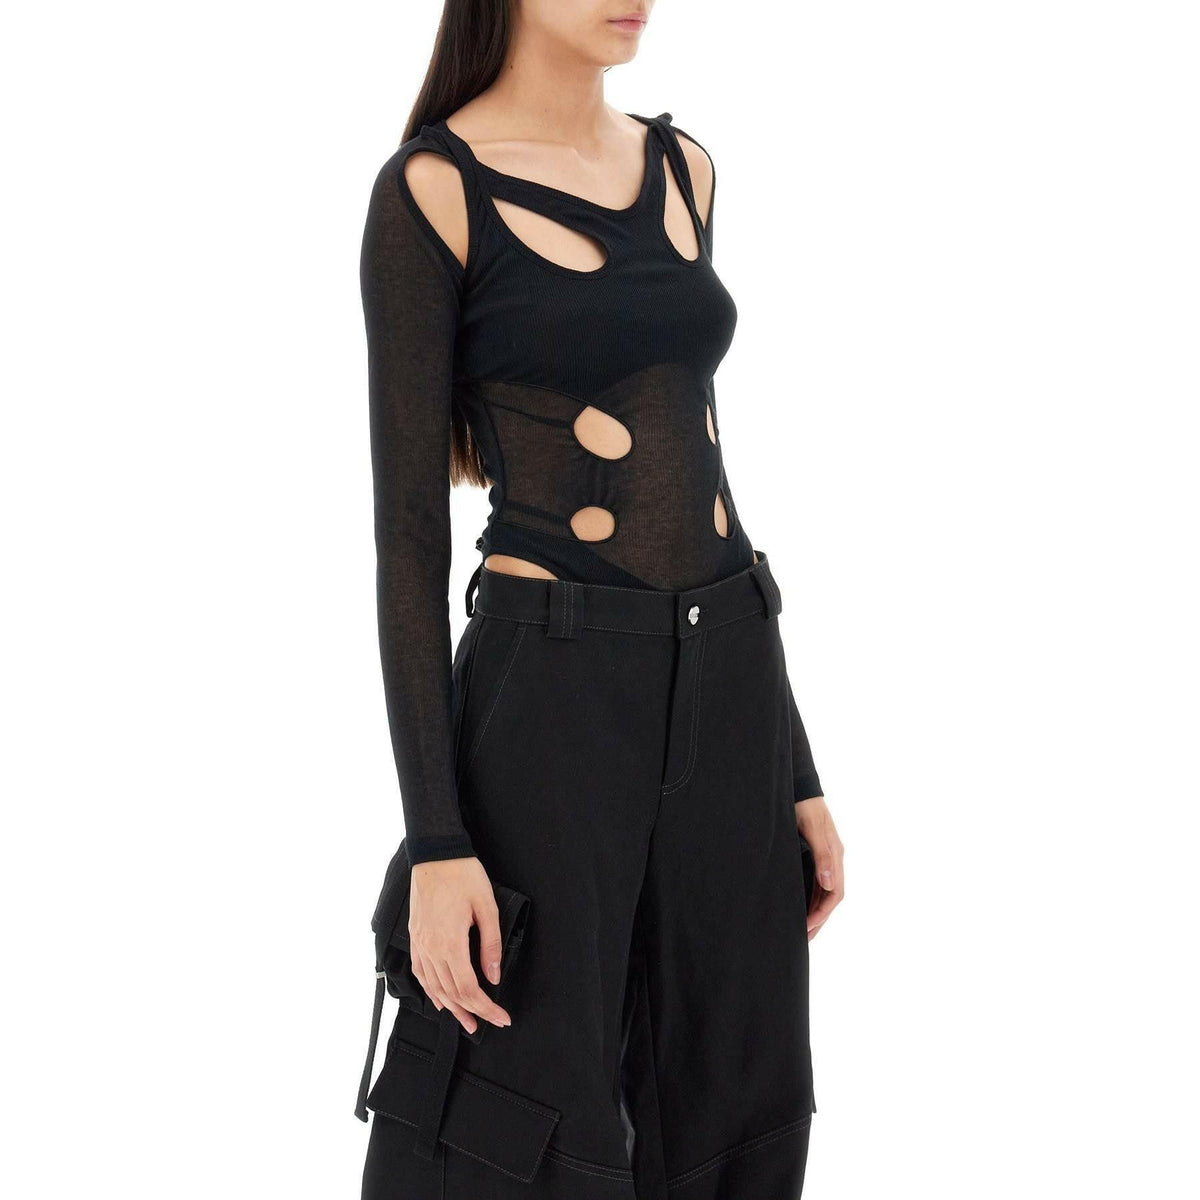 DION LEE - Long Sleeved Bodysuit With Cut Outs - JOHN JULIA